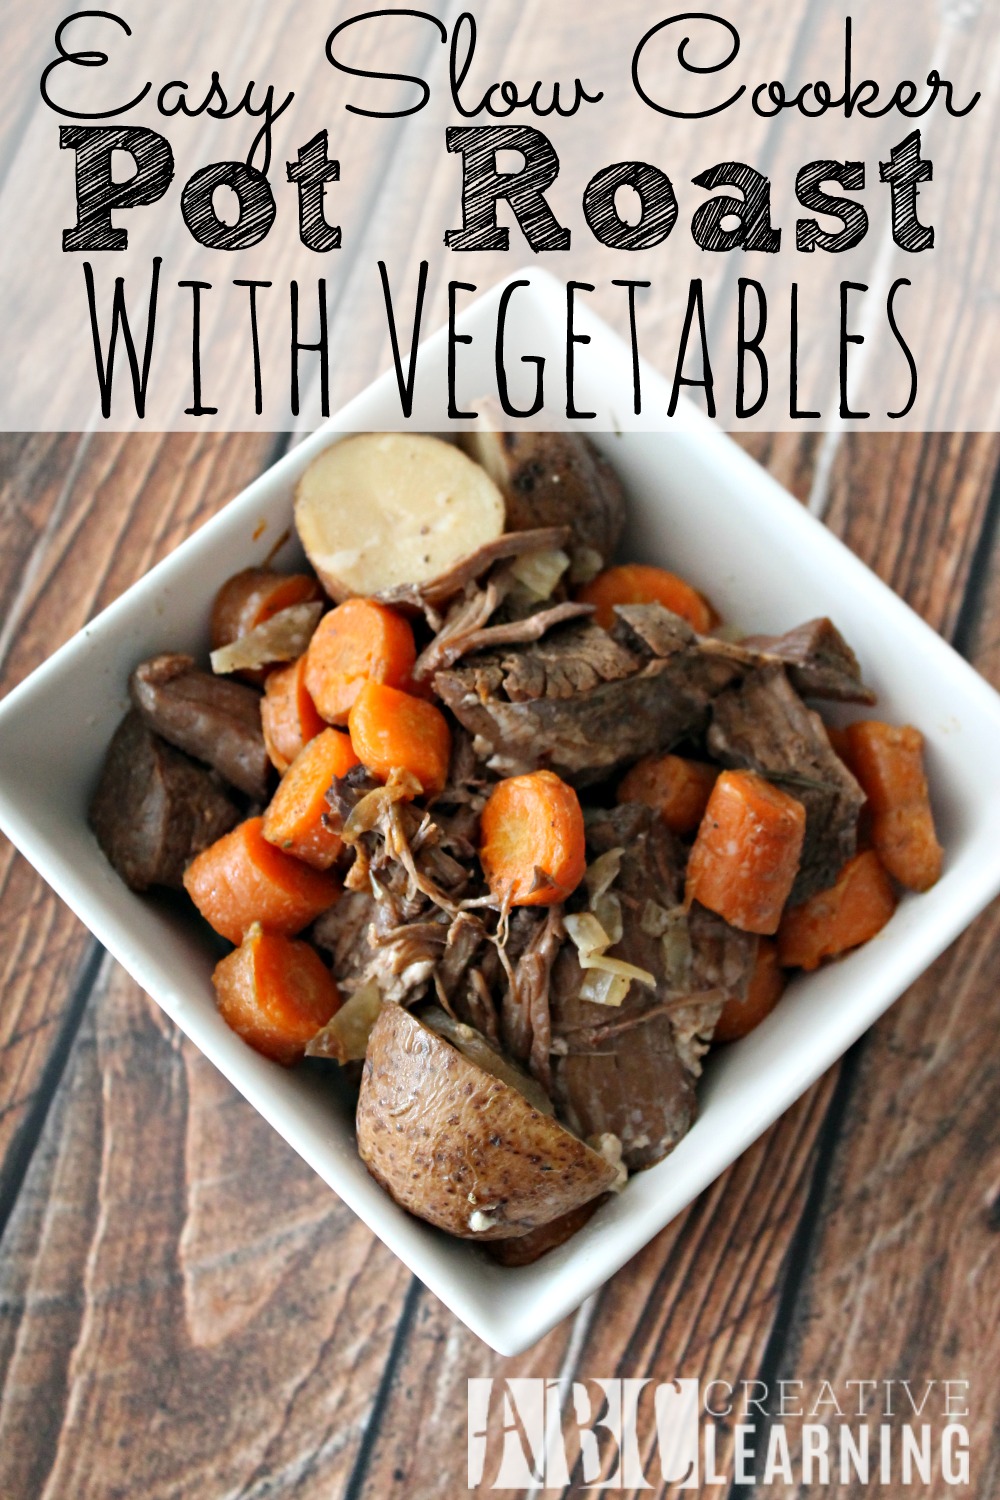 Easy Slow Cooker Pot Roast With Vegetables - abccreativelearning.com